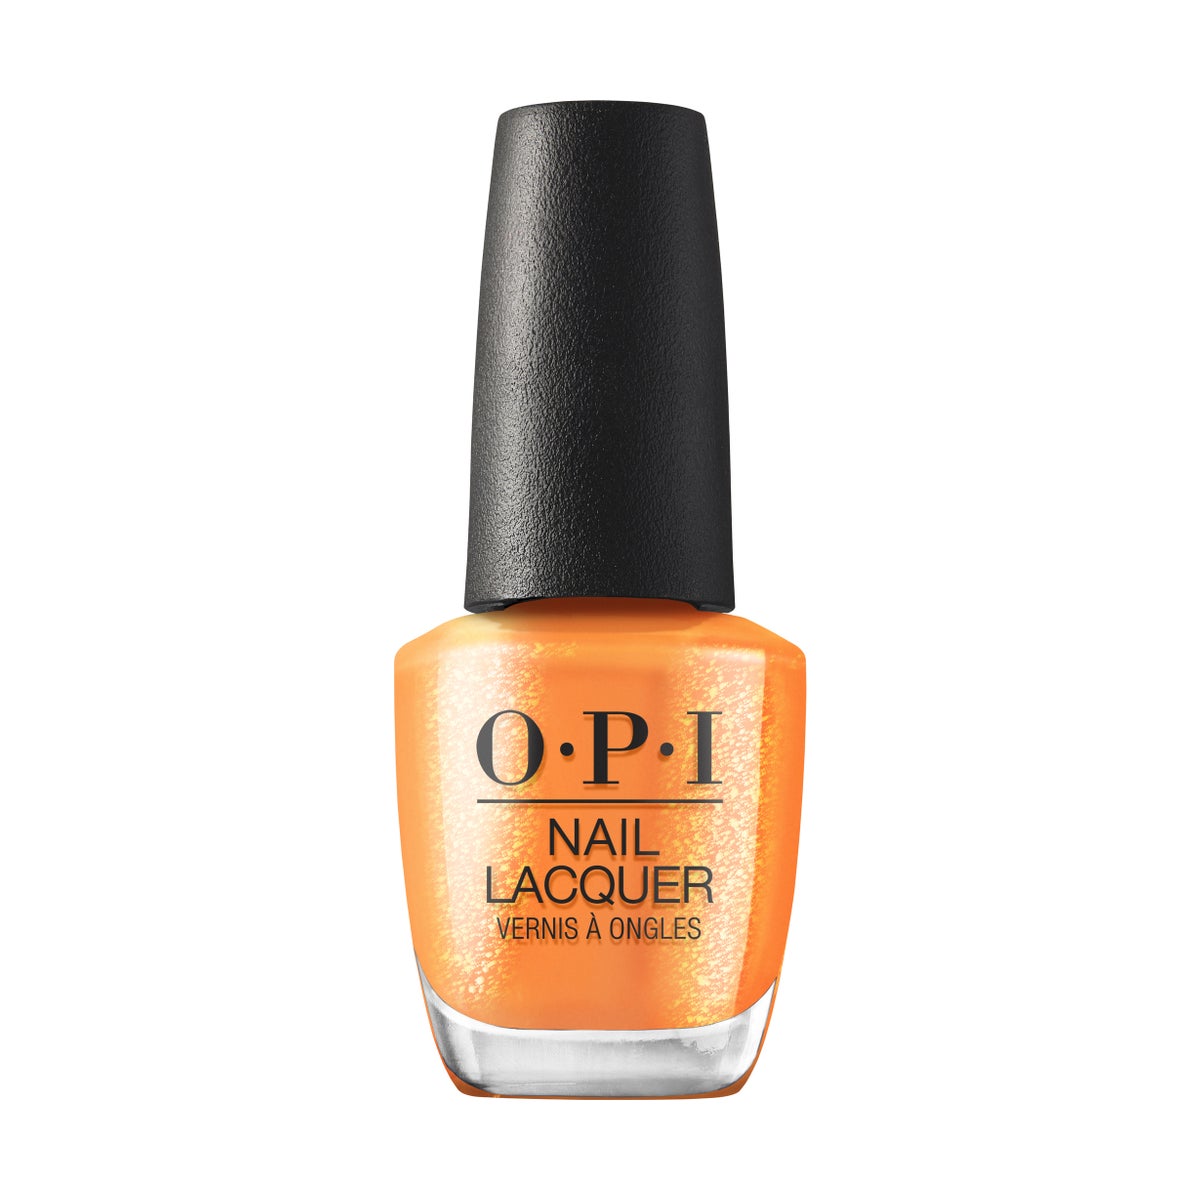 Mango For It - OPI Nail Lacquer